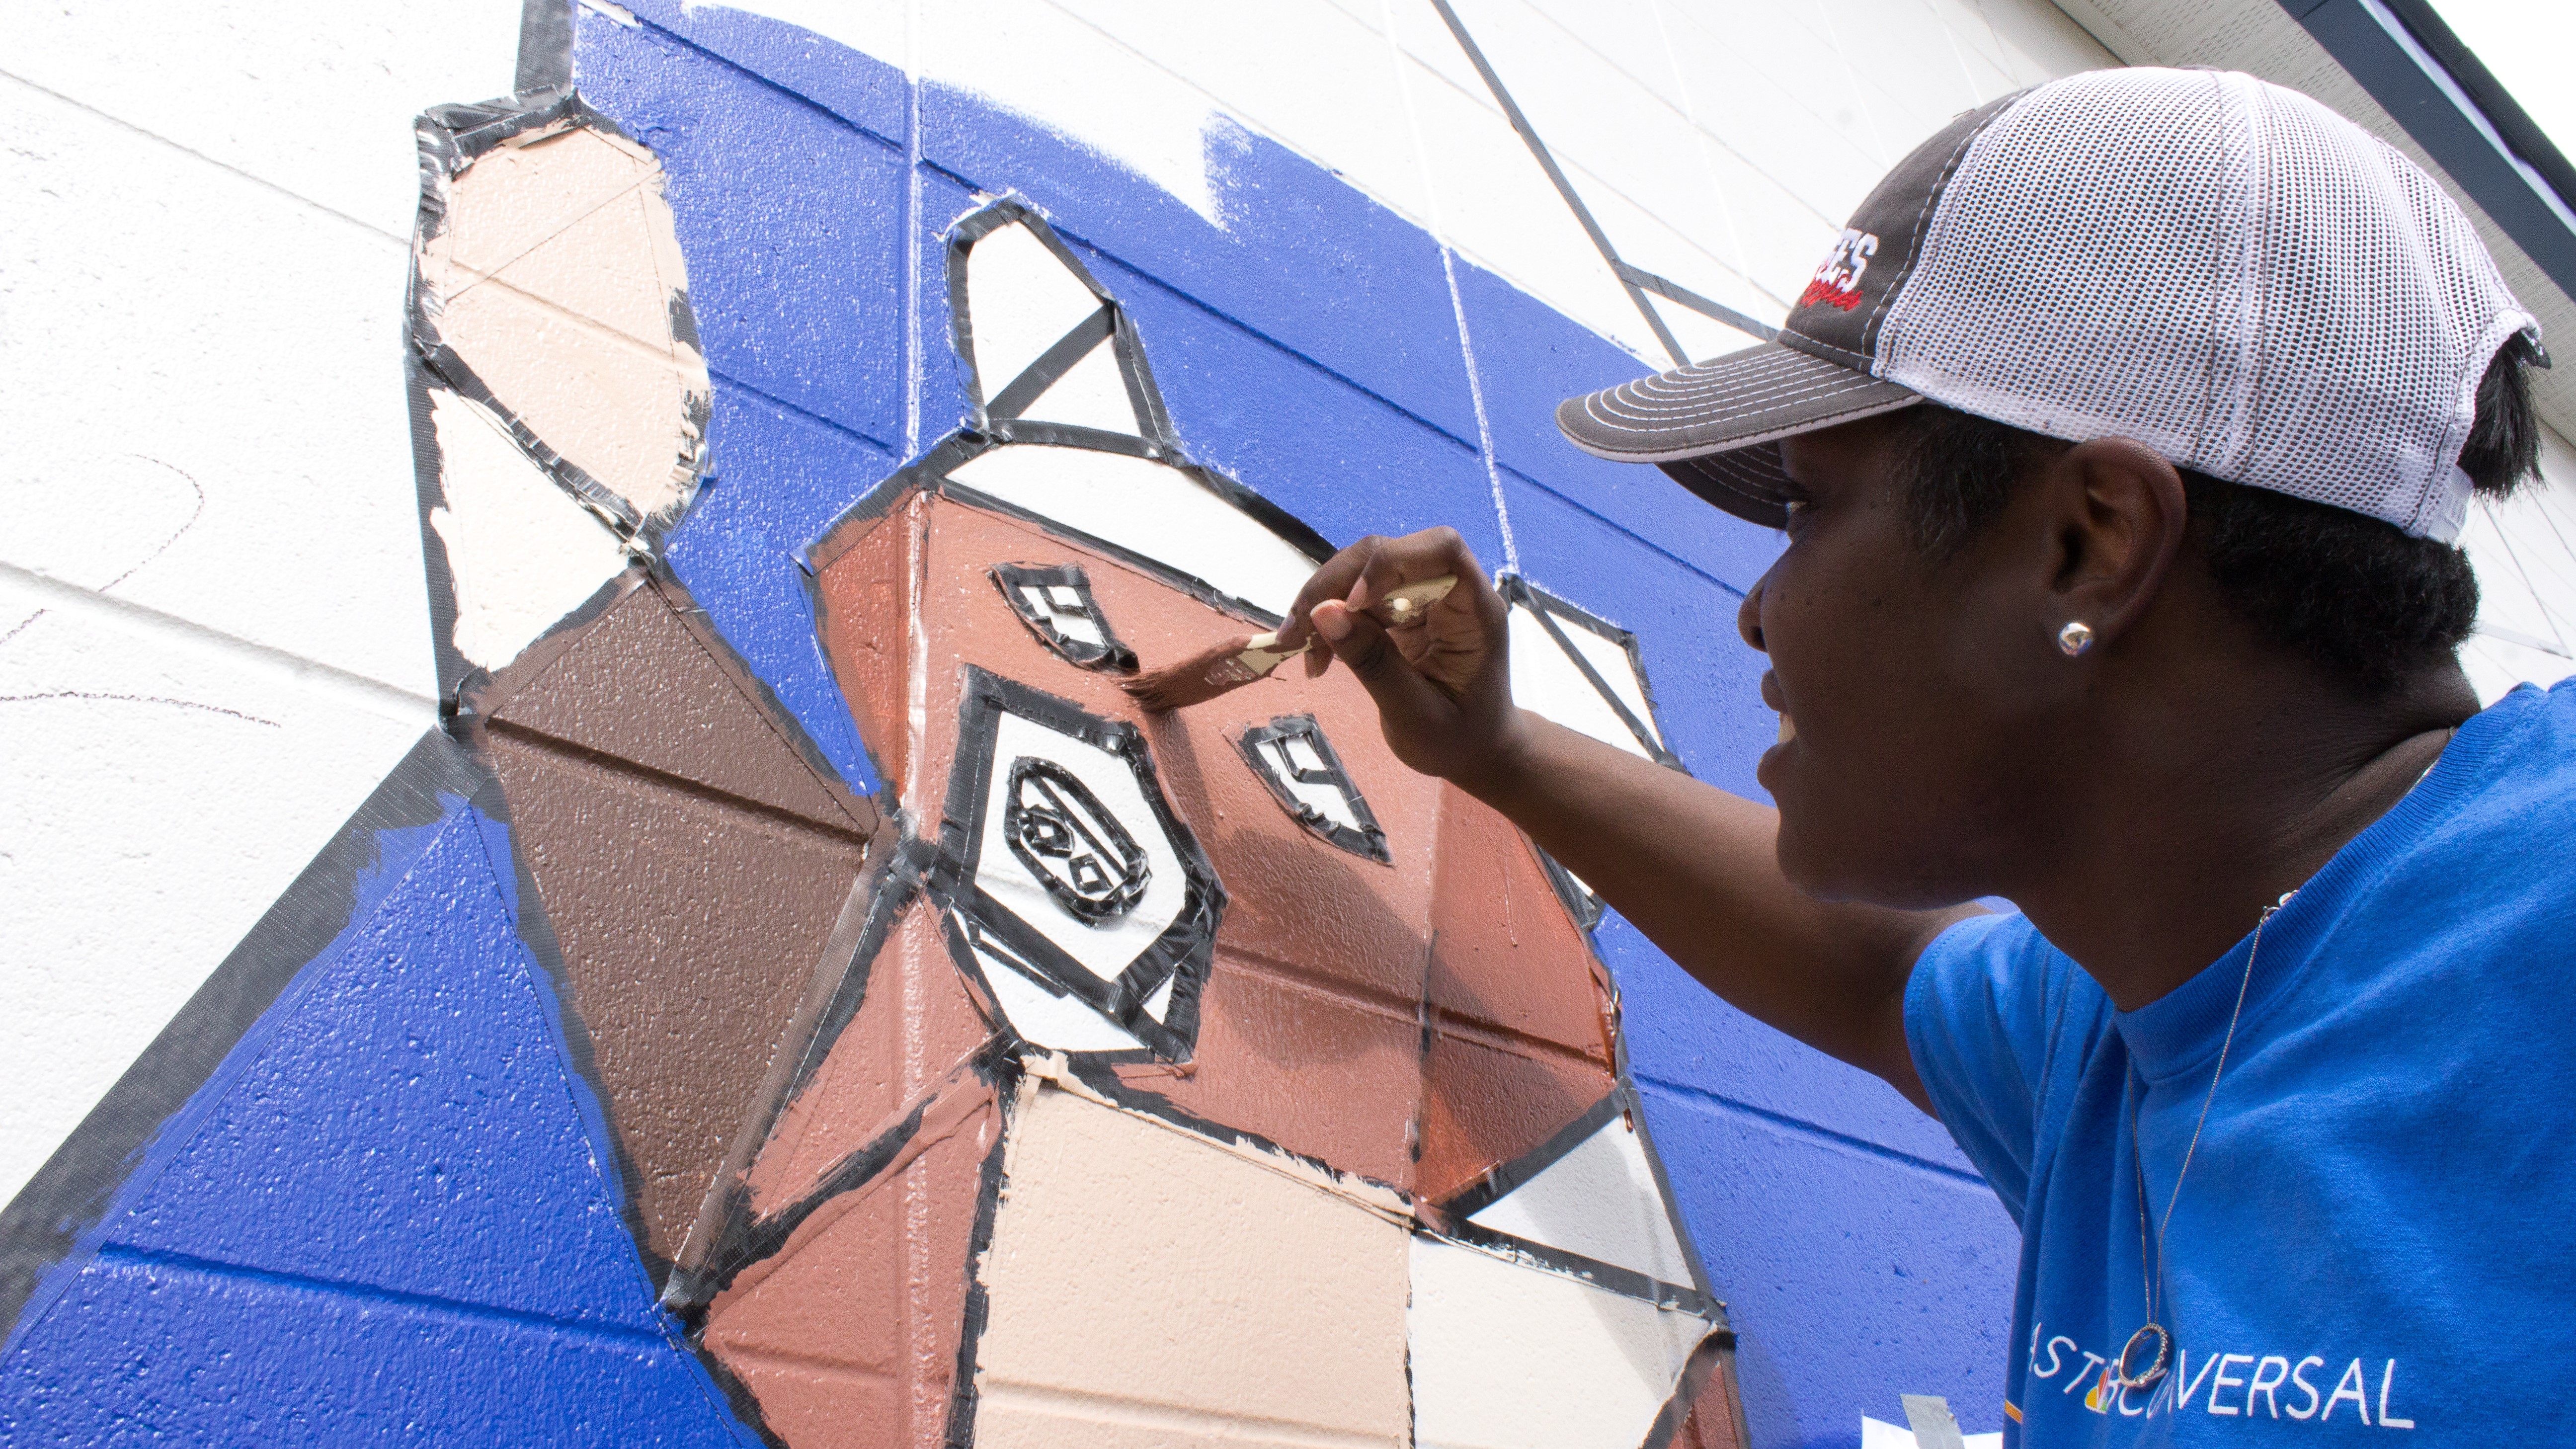 A Comcast Cares Day volunteer paints a mural.